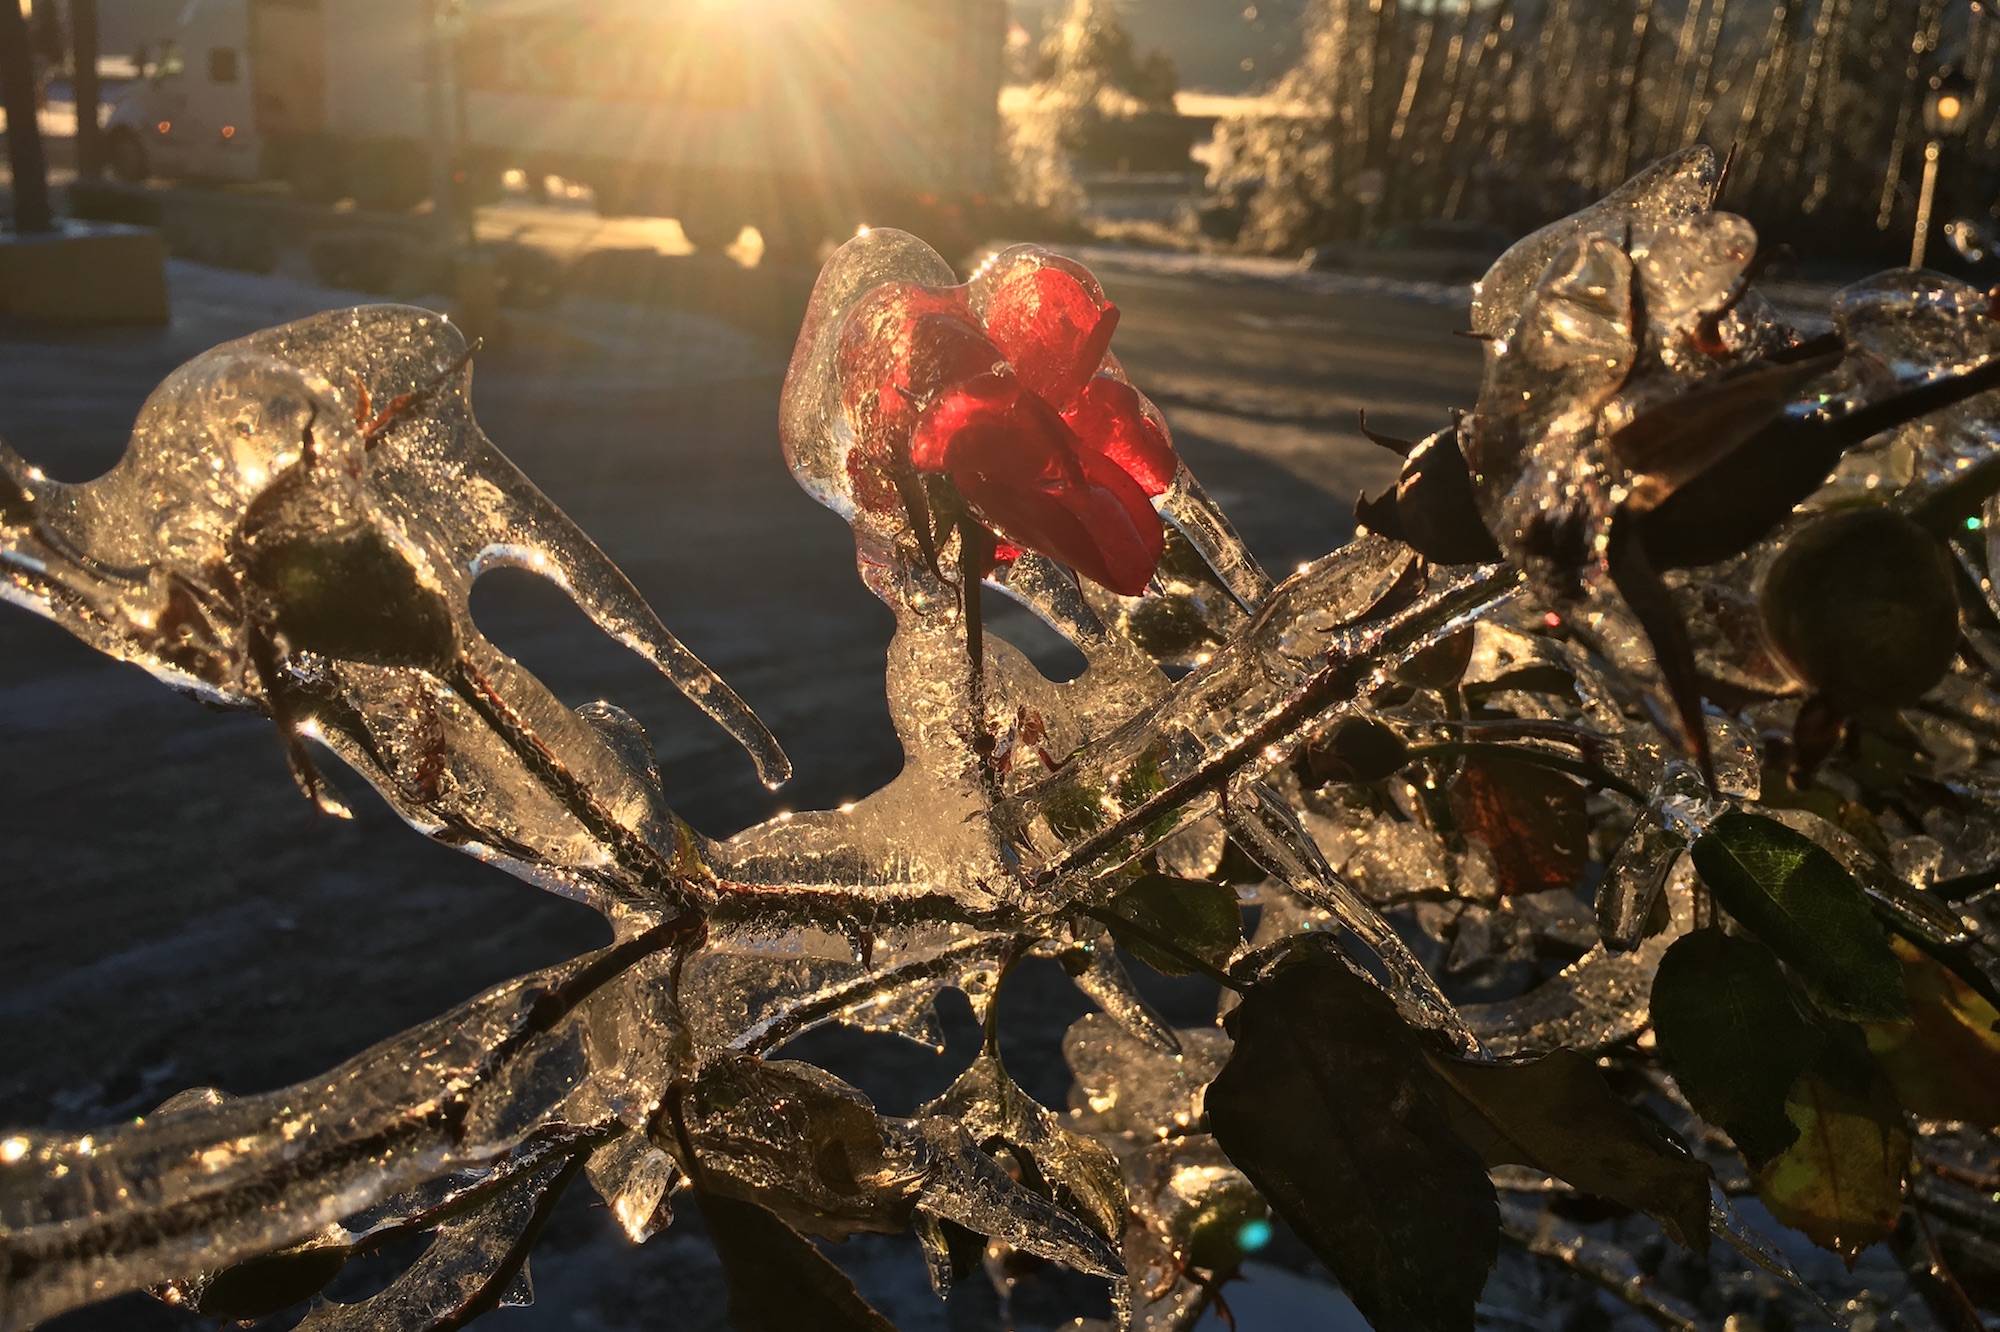 Sunshine and the freezing rain aftermath provided some magical scenes on New Year’s Eve in Abbotsford. Image credit: Carmen Weld/Black Press